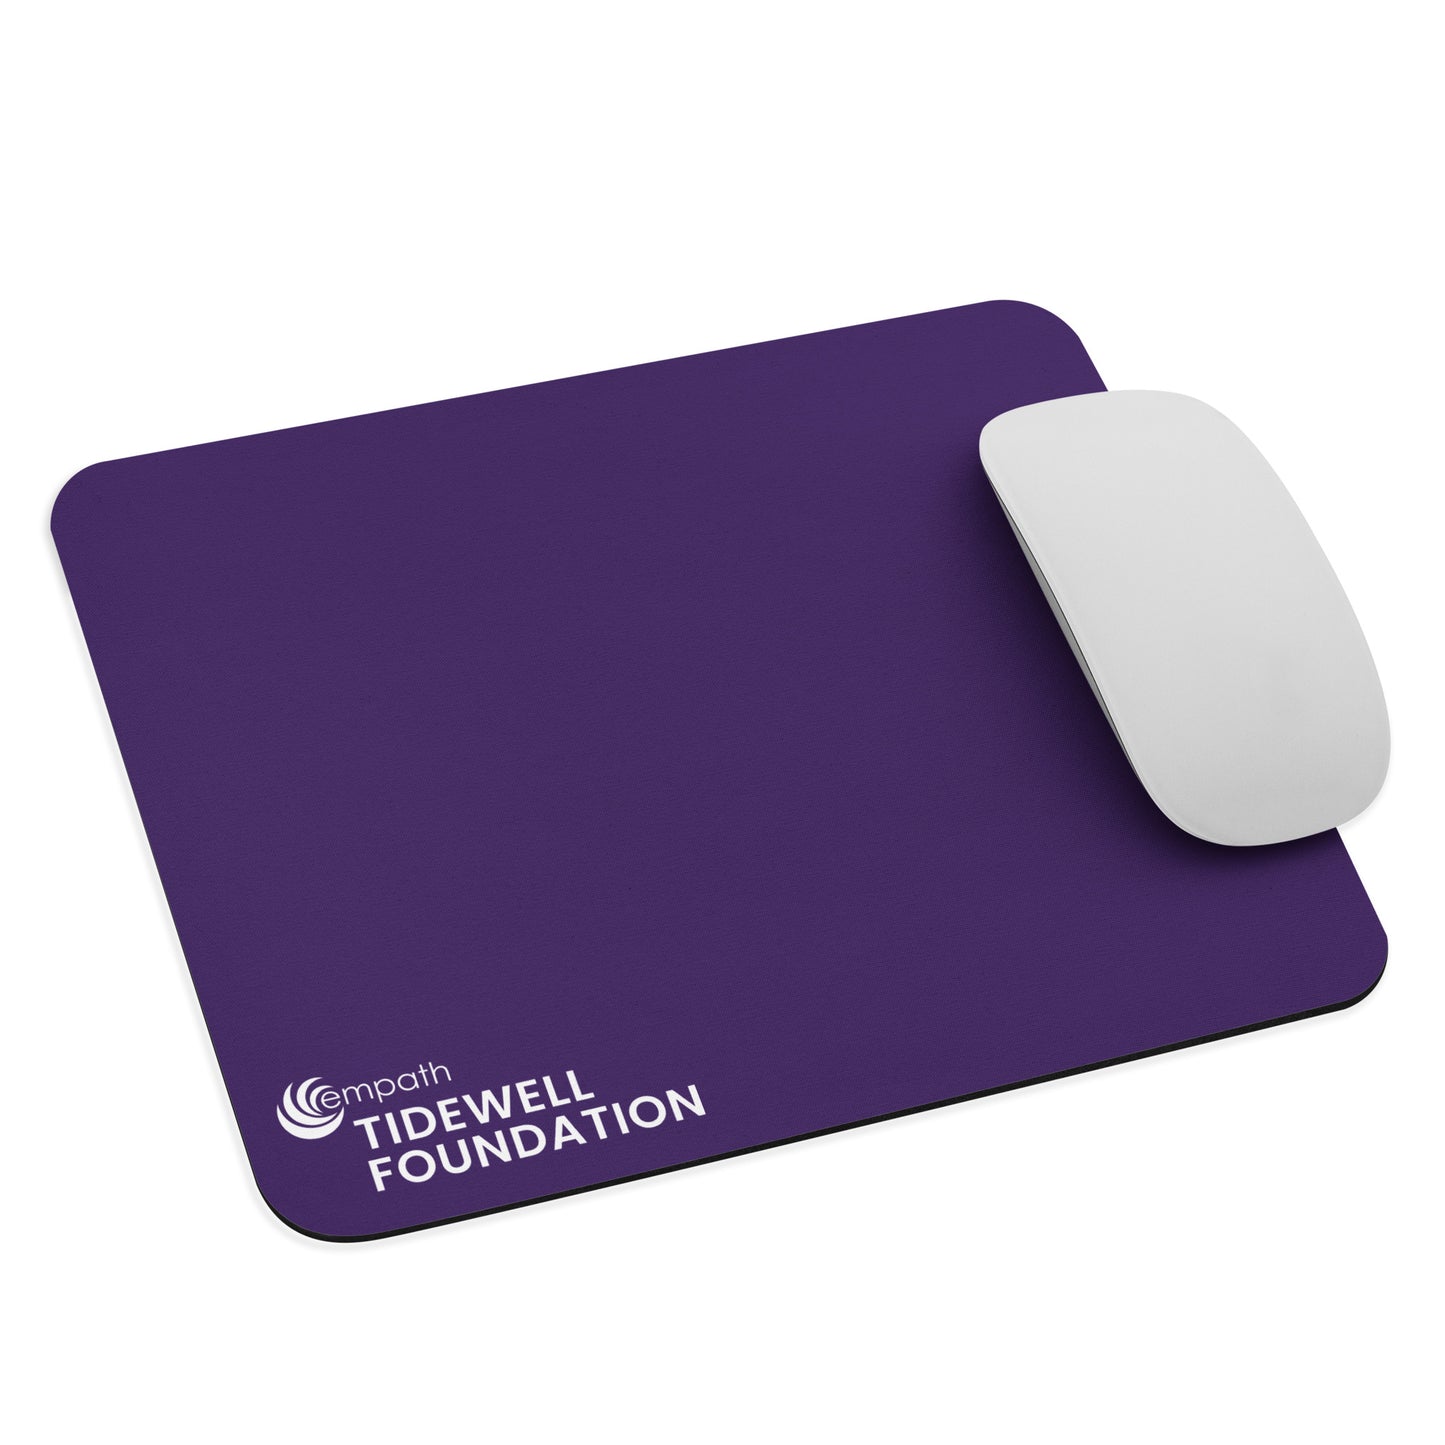 Mouse pad - Tidewell Foundation